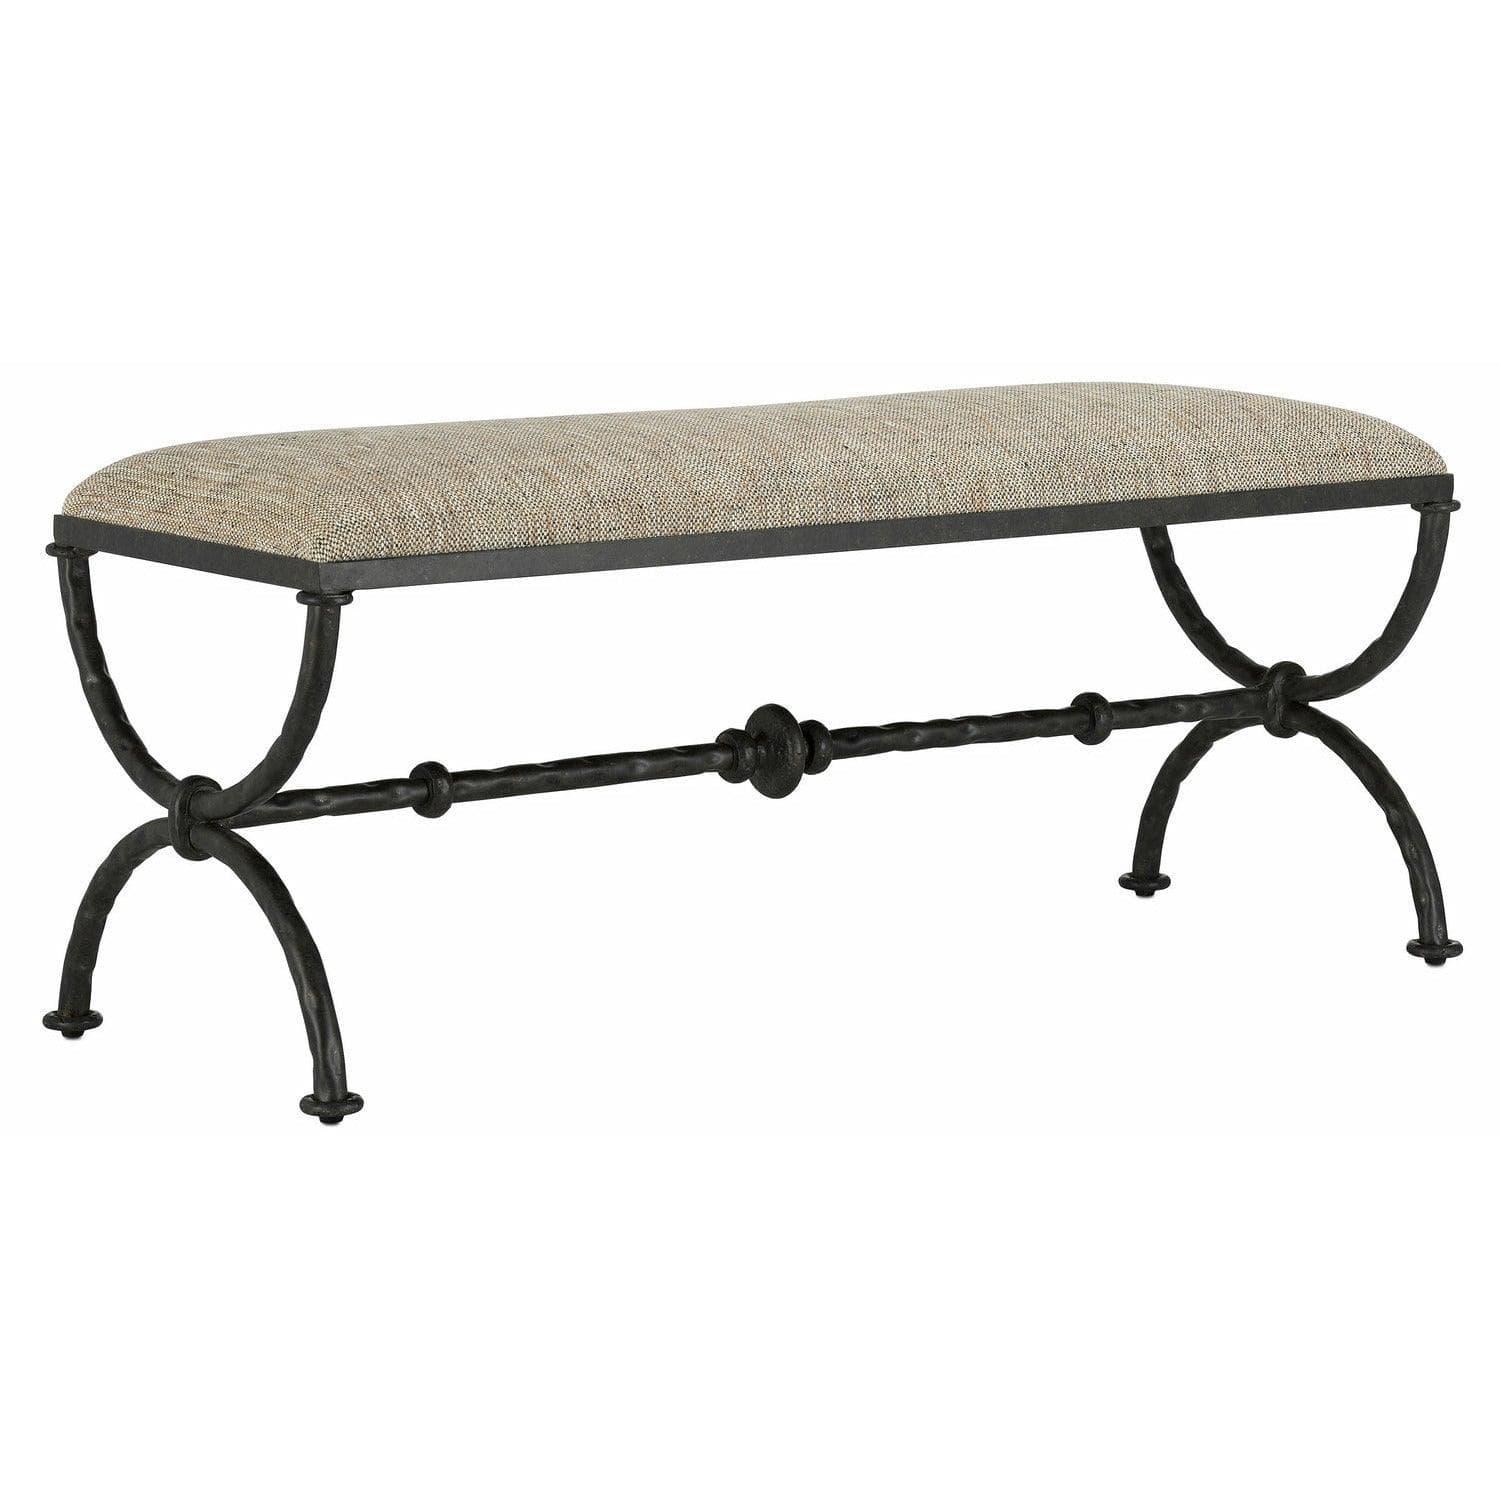 Currey and Company - Agora Bench - 7000-0802 | Montreal Lighting & Hardware